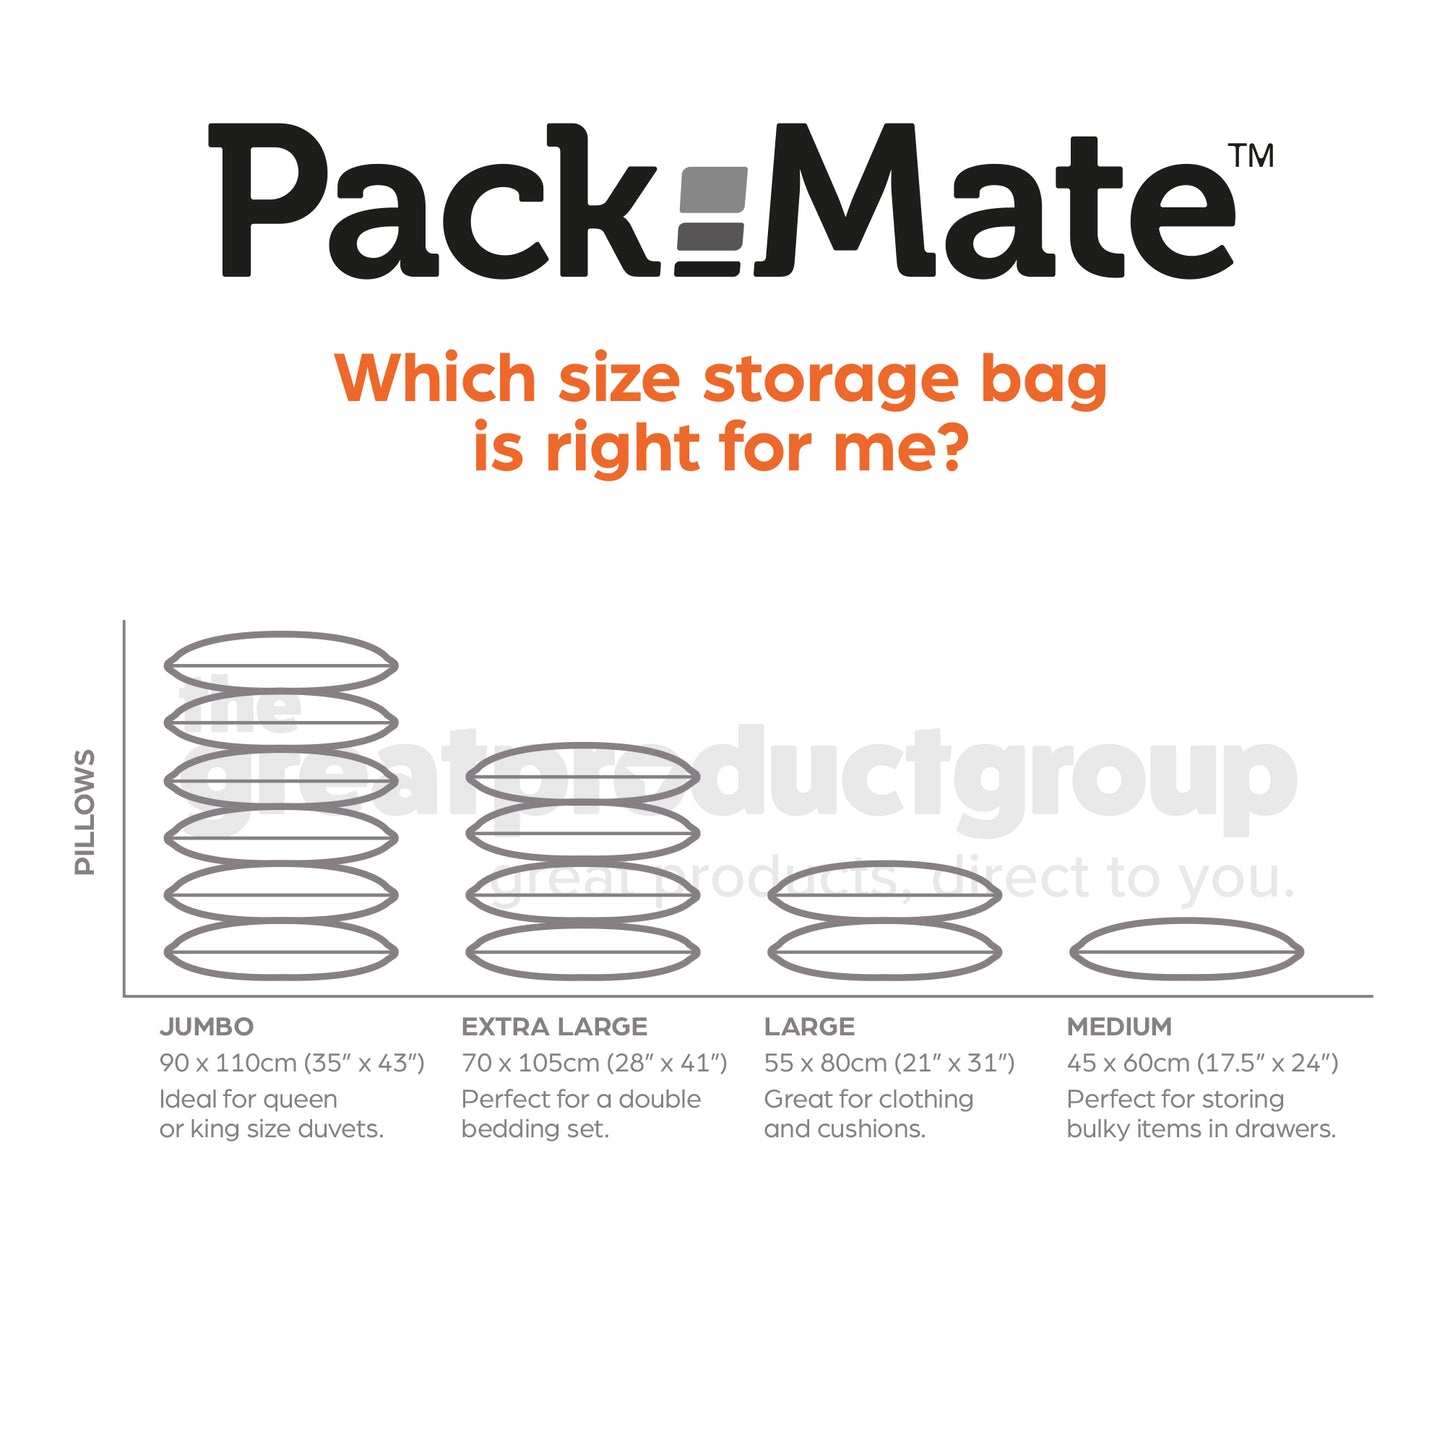 Packmate EXTRA LARGE Flat Vacuum Storage Bags (70x105cm)